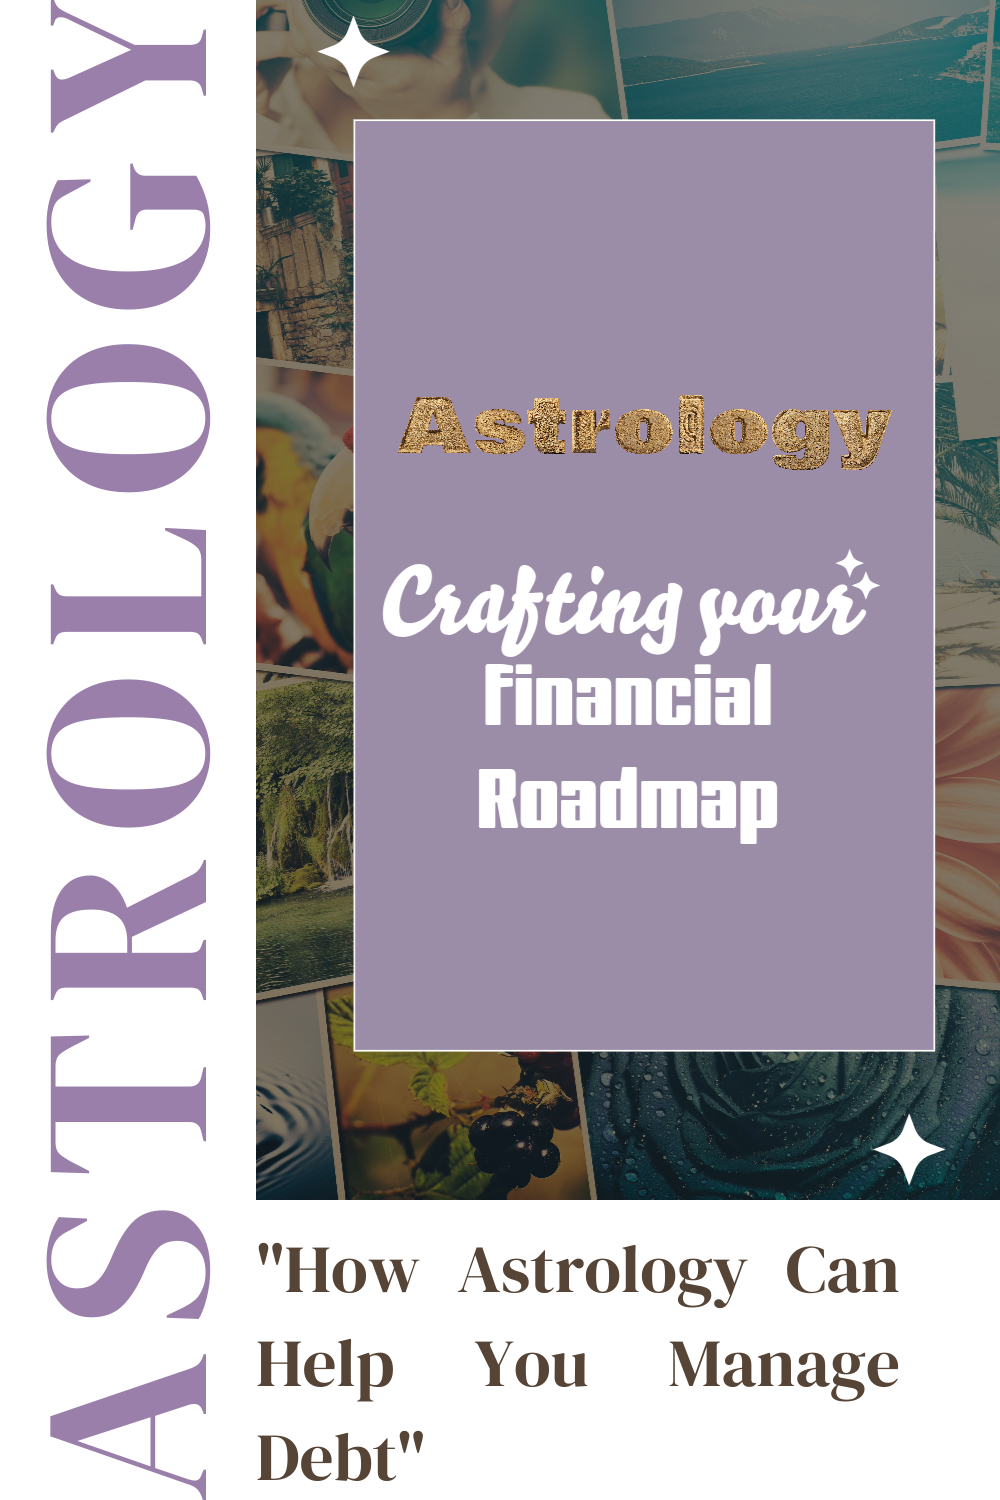 Astrological Houses and Debt Management